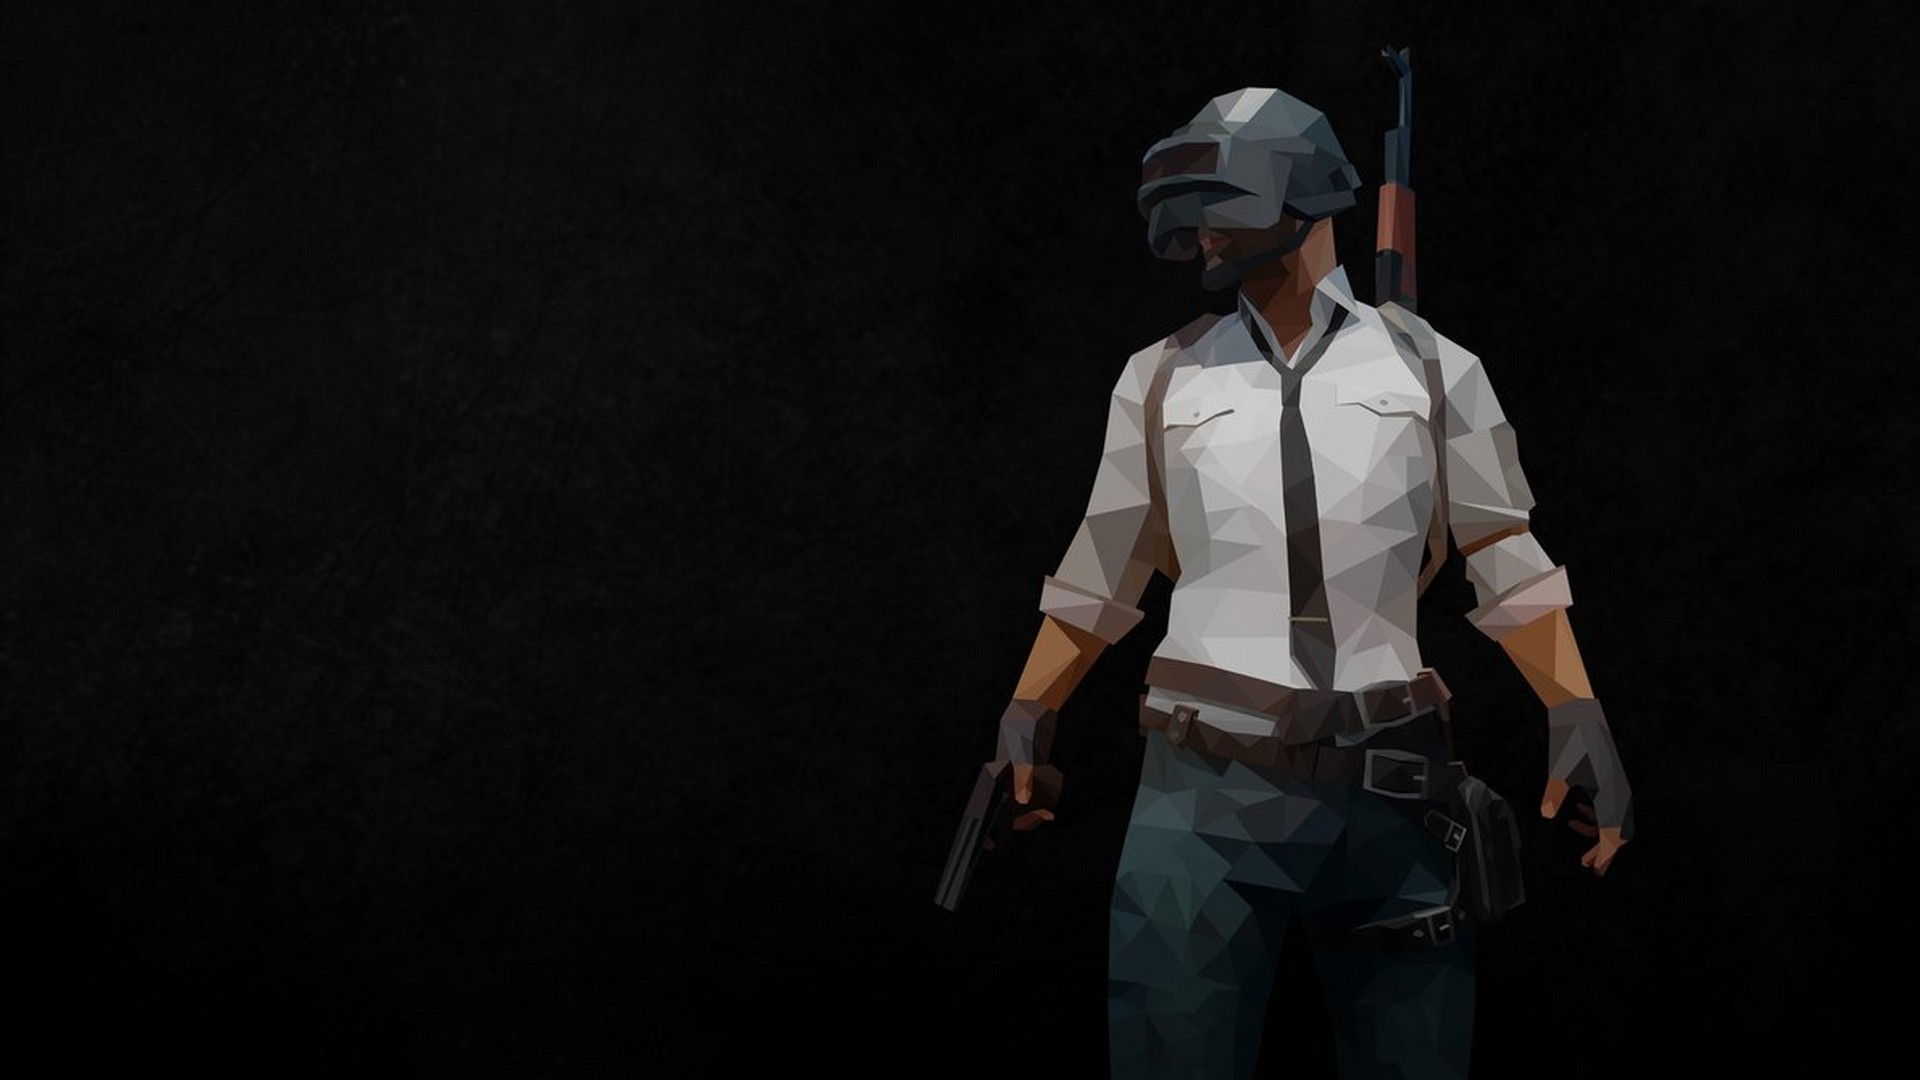 PUBG Update Xbox One Wallpaper with image resolution 1920x1080 pixel. You can use this wallpaper as background for your desktop Computer Screensavers, Android or iPhone smartphones